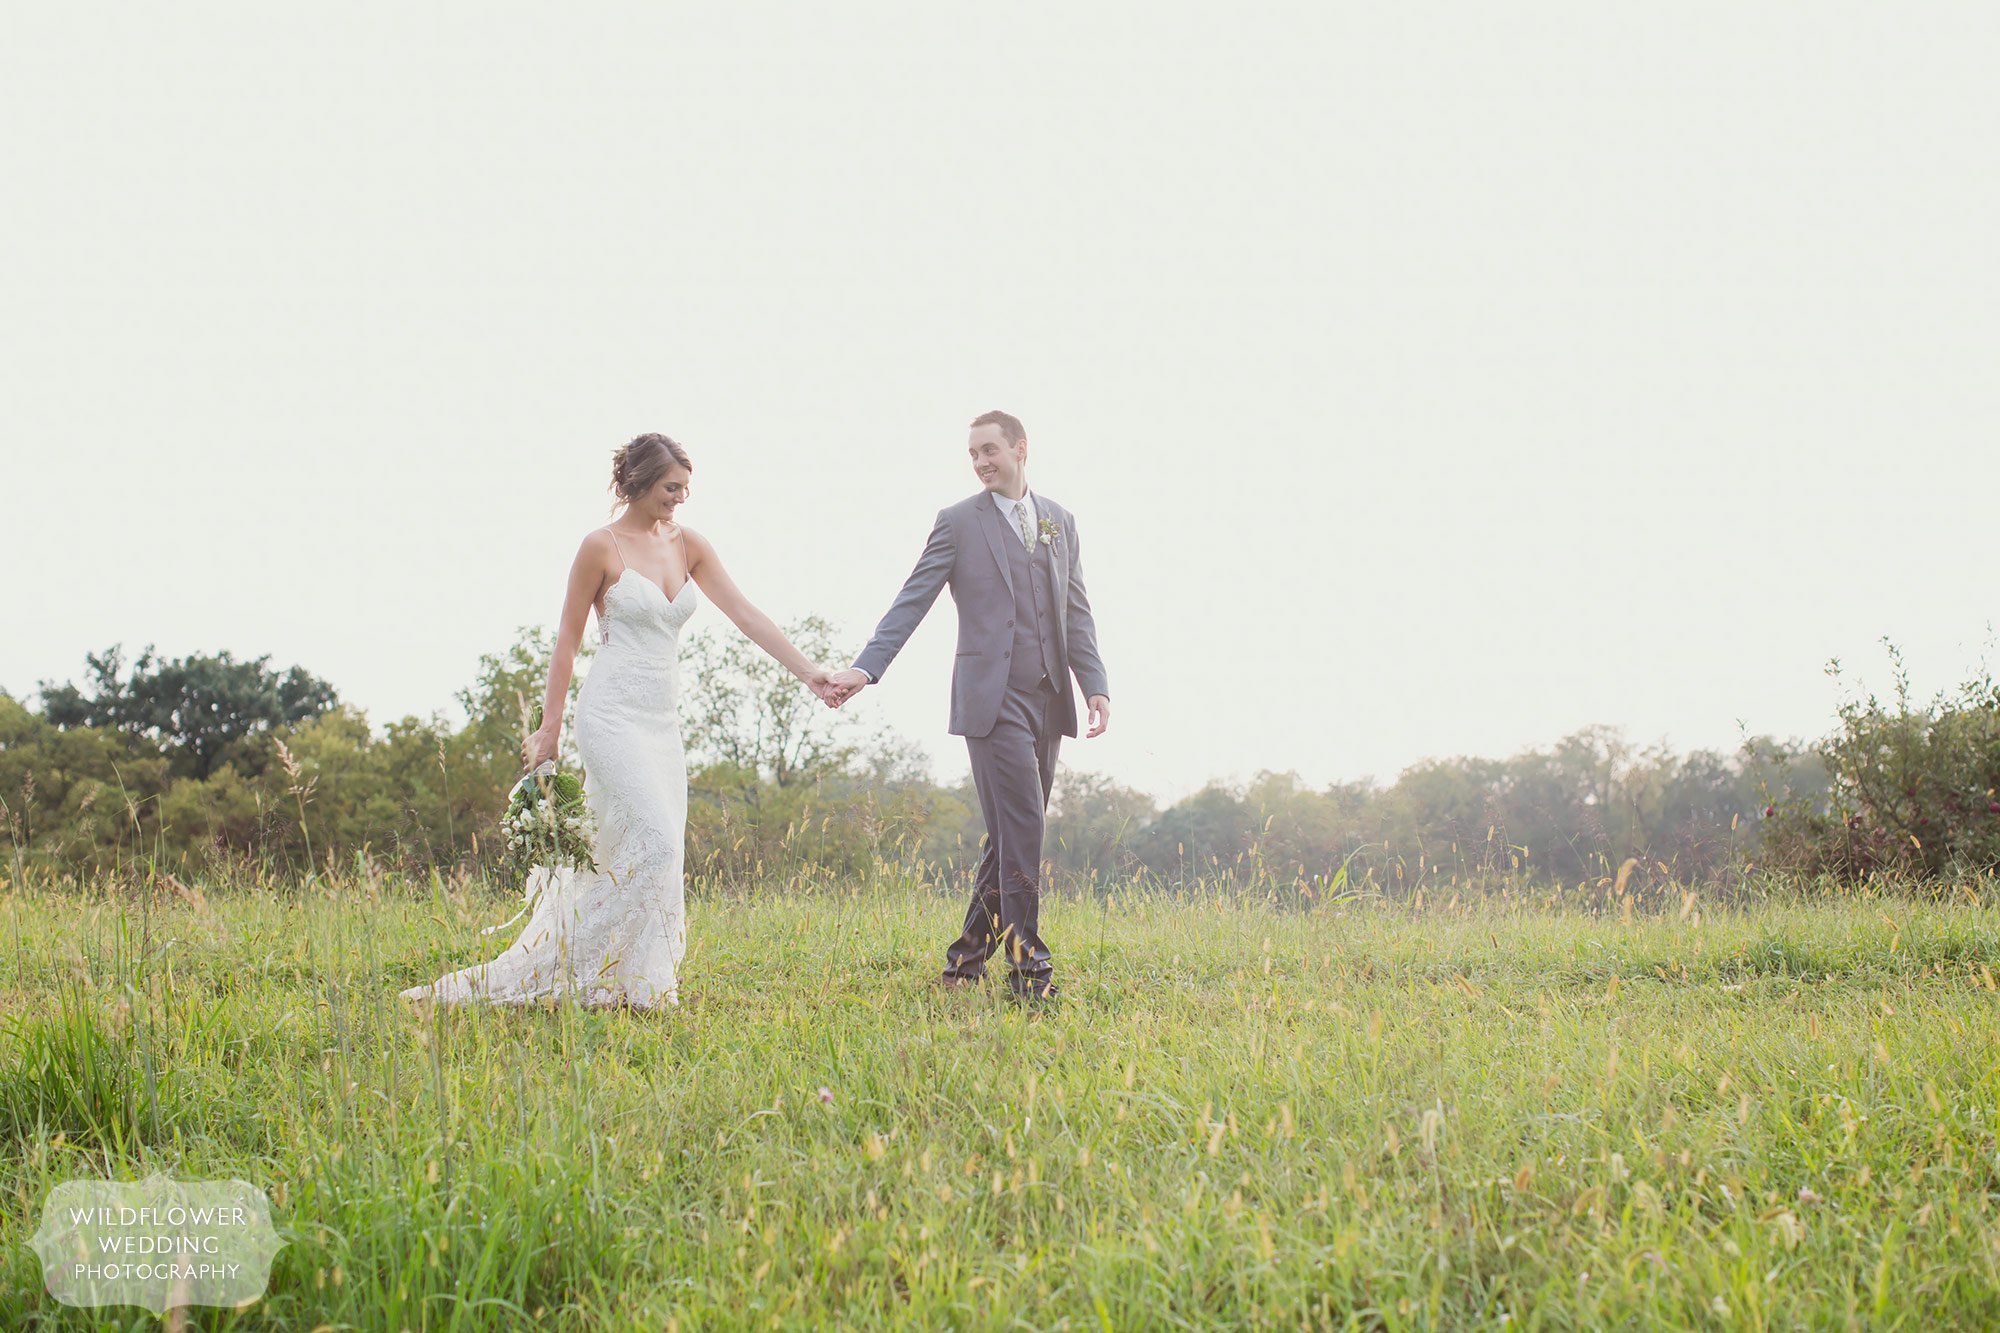 Soft light wedding photography of bride and groom walking through field holding hands in Weston, MO.